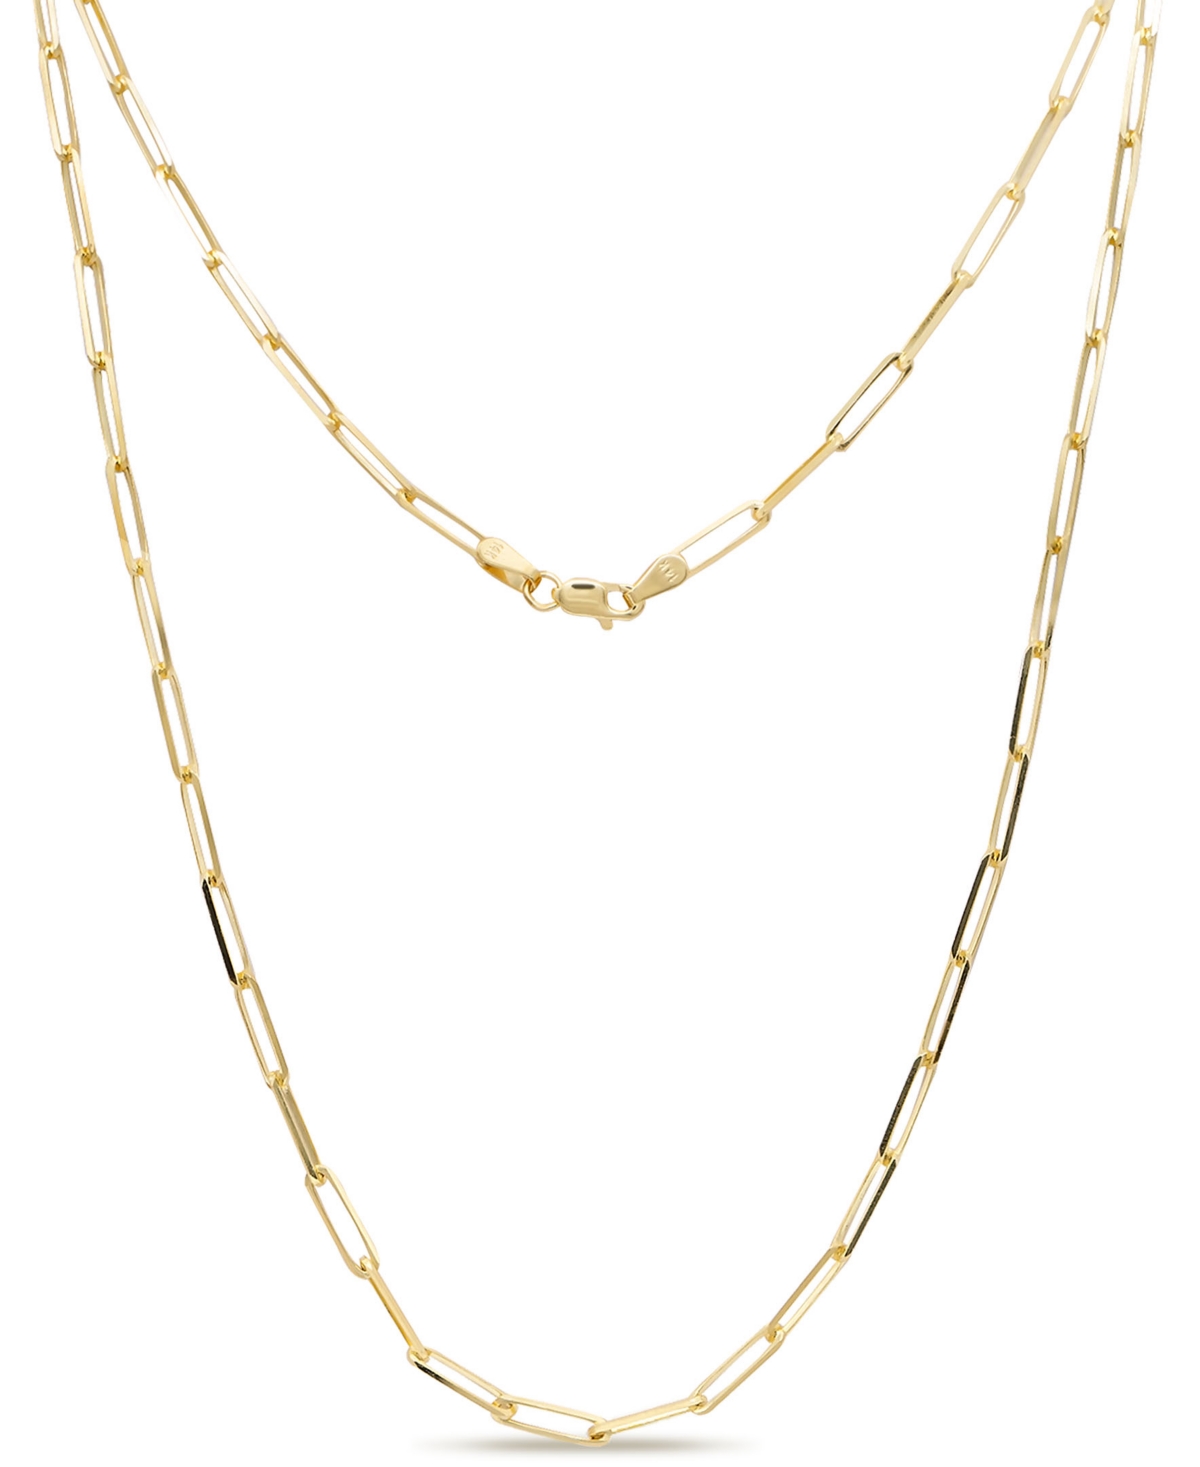 14K Gold Paperclip 2.8mm Chain Necklace, 22", approx. 5.9gr - Gold